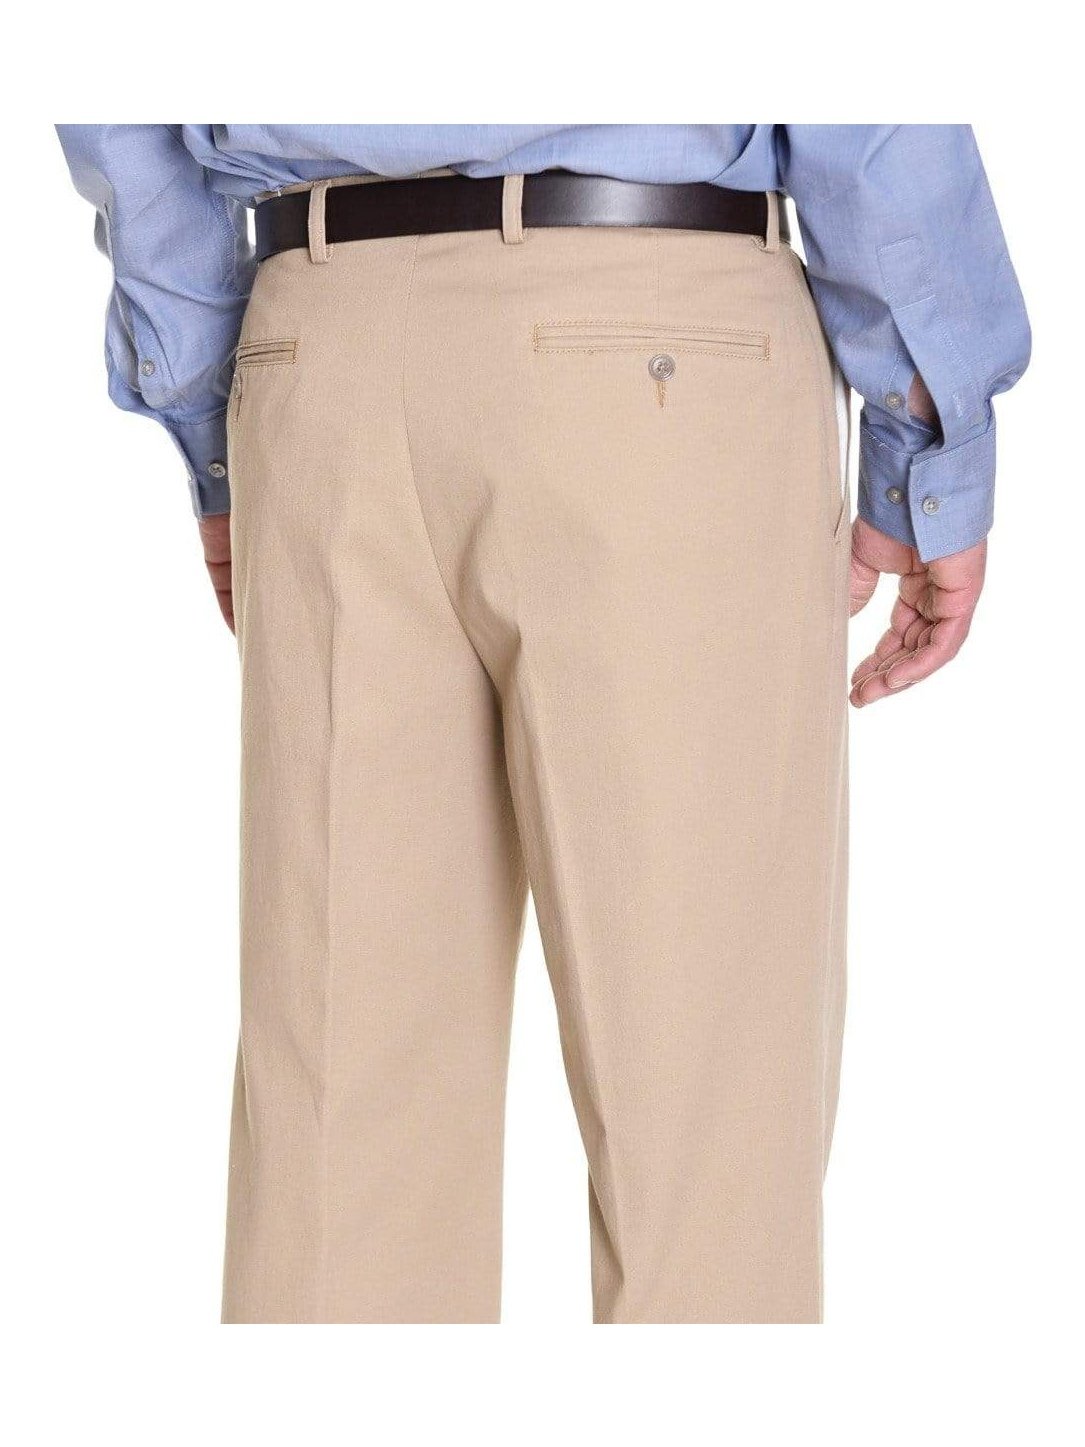 Buy Space Grey Chinos for Men Online in India at Beyoung